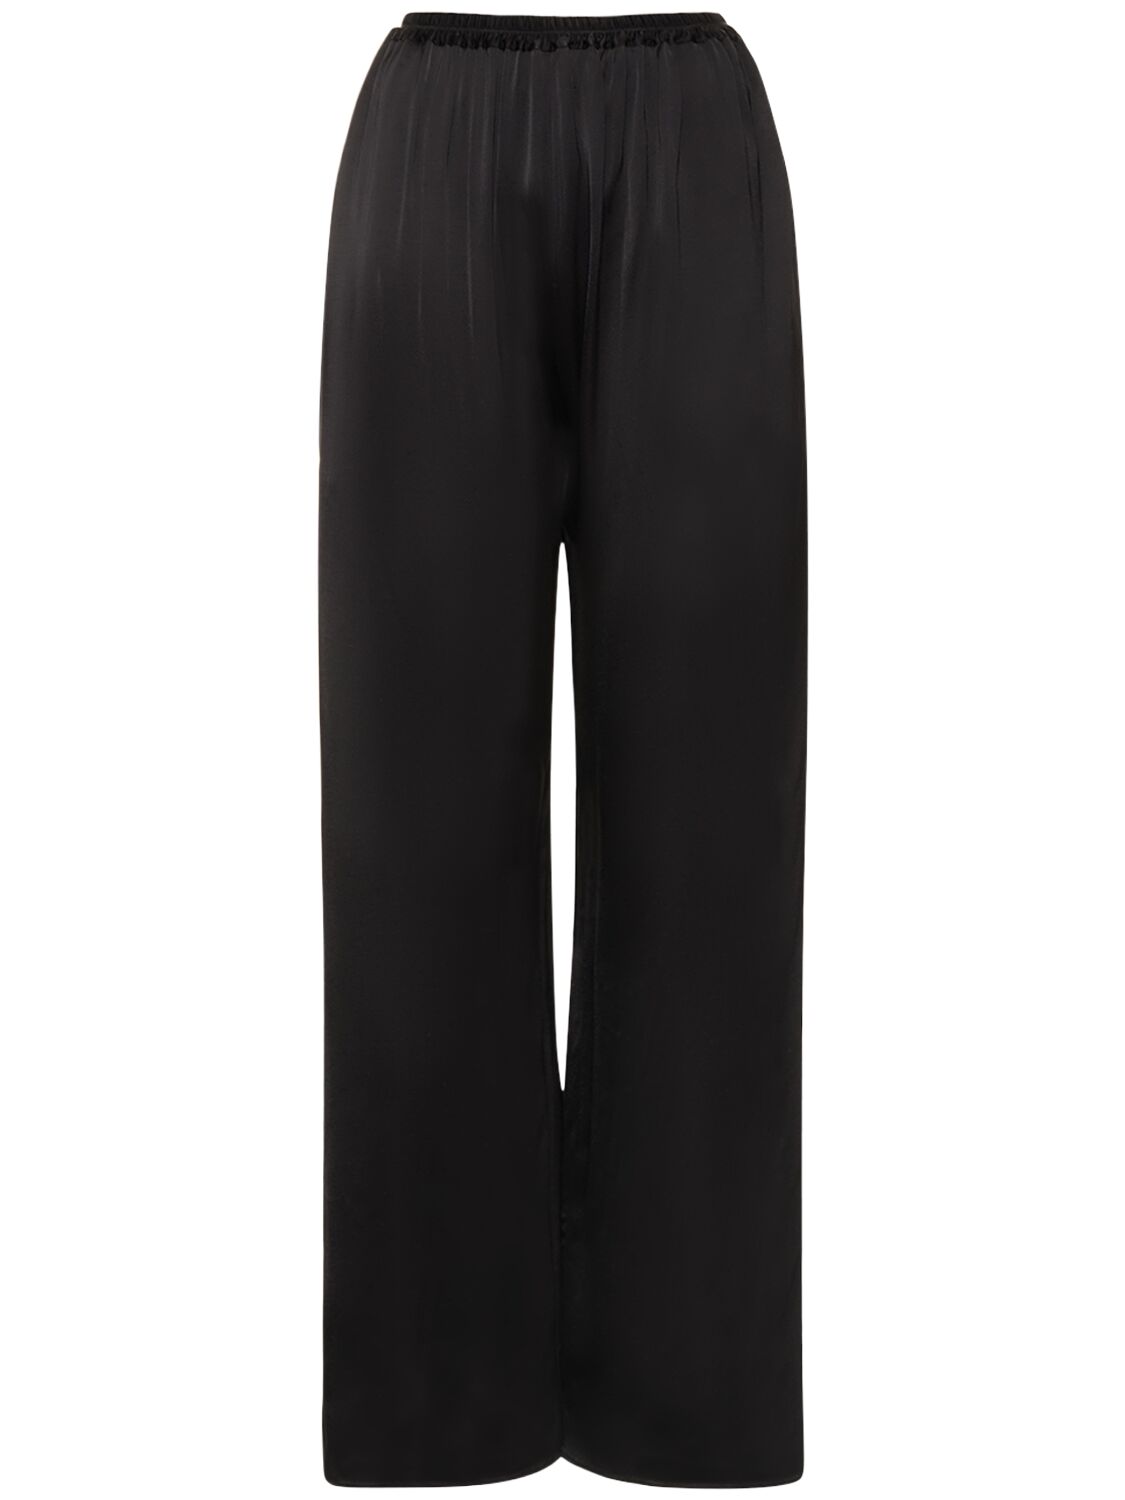 Image of Relaxed Fit Viscose Satin Pants